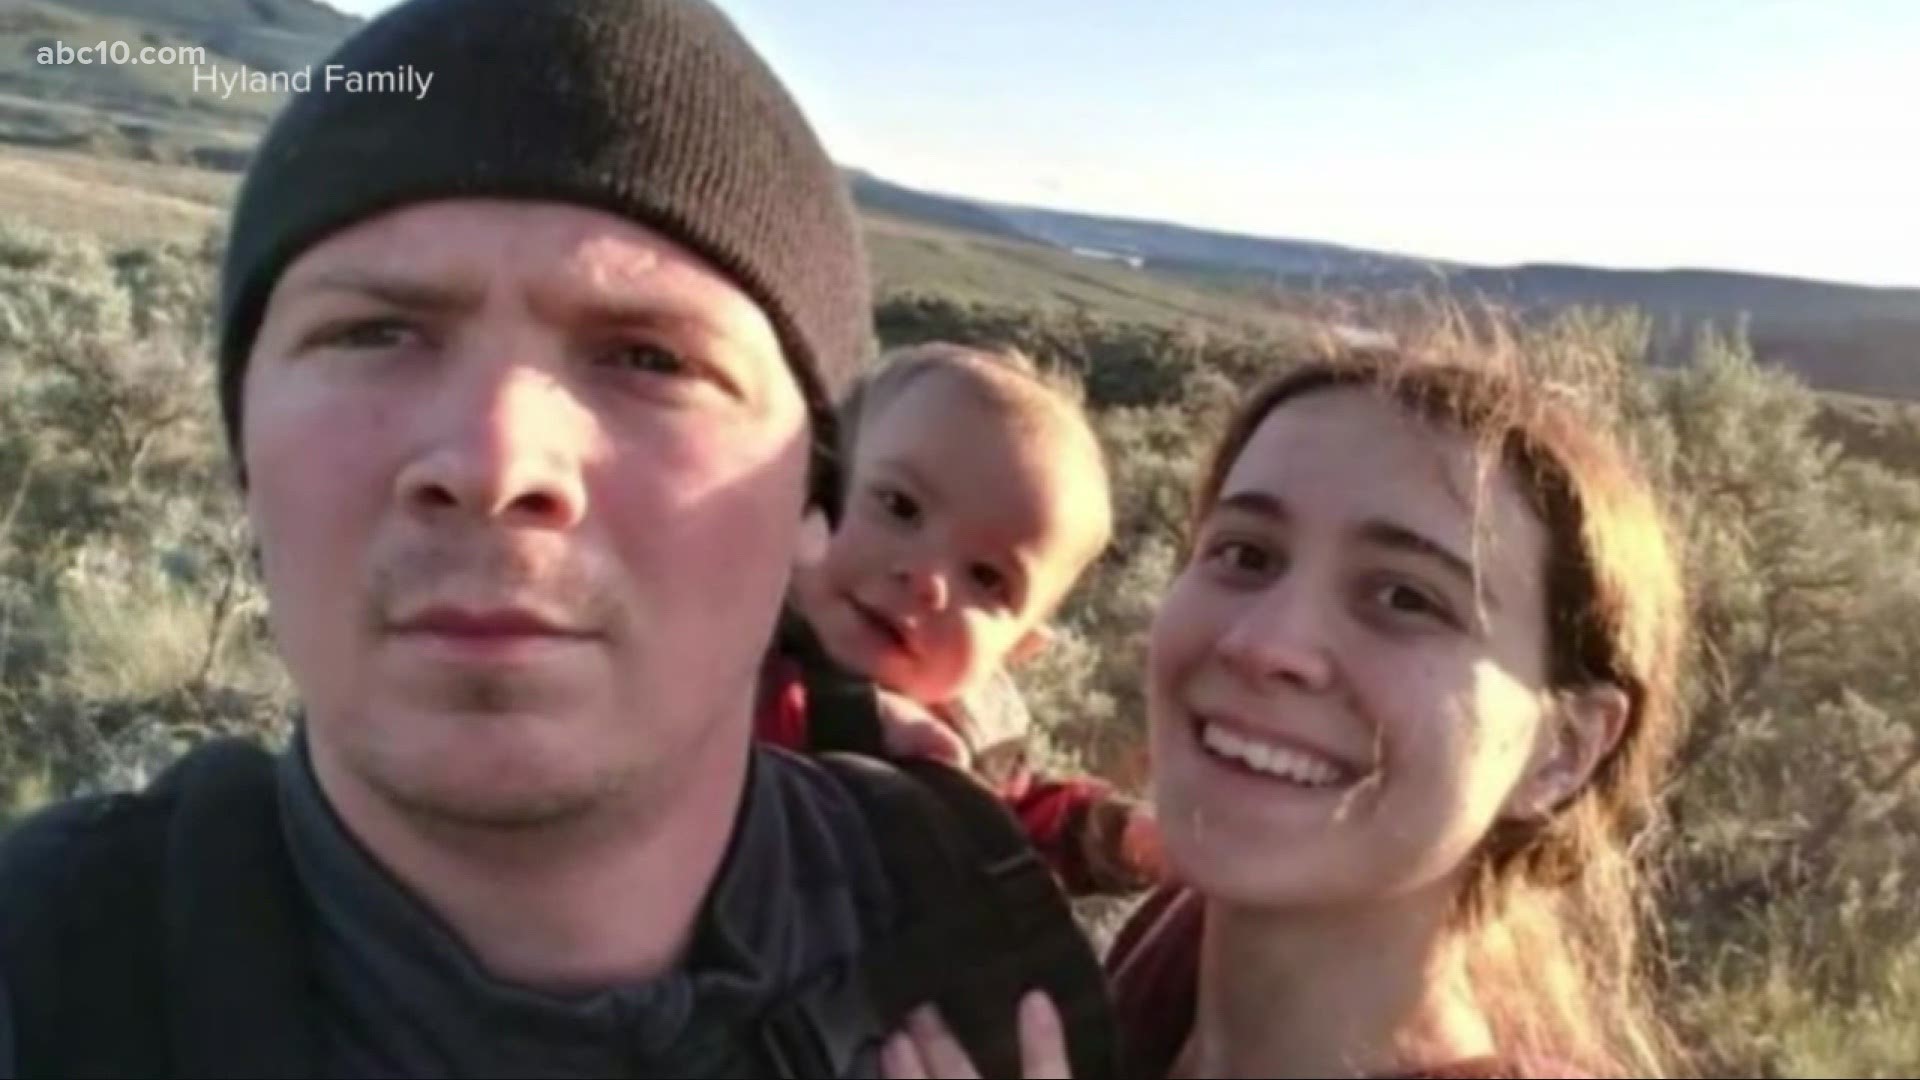 Jamie Hyland, a Citrus Heights native, lost her 1-year-old son while her family attempted to outrun the Cold Springs Fire in Washington.